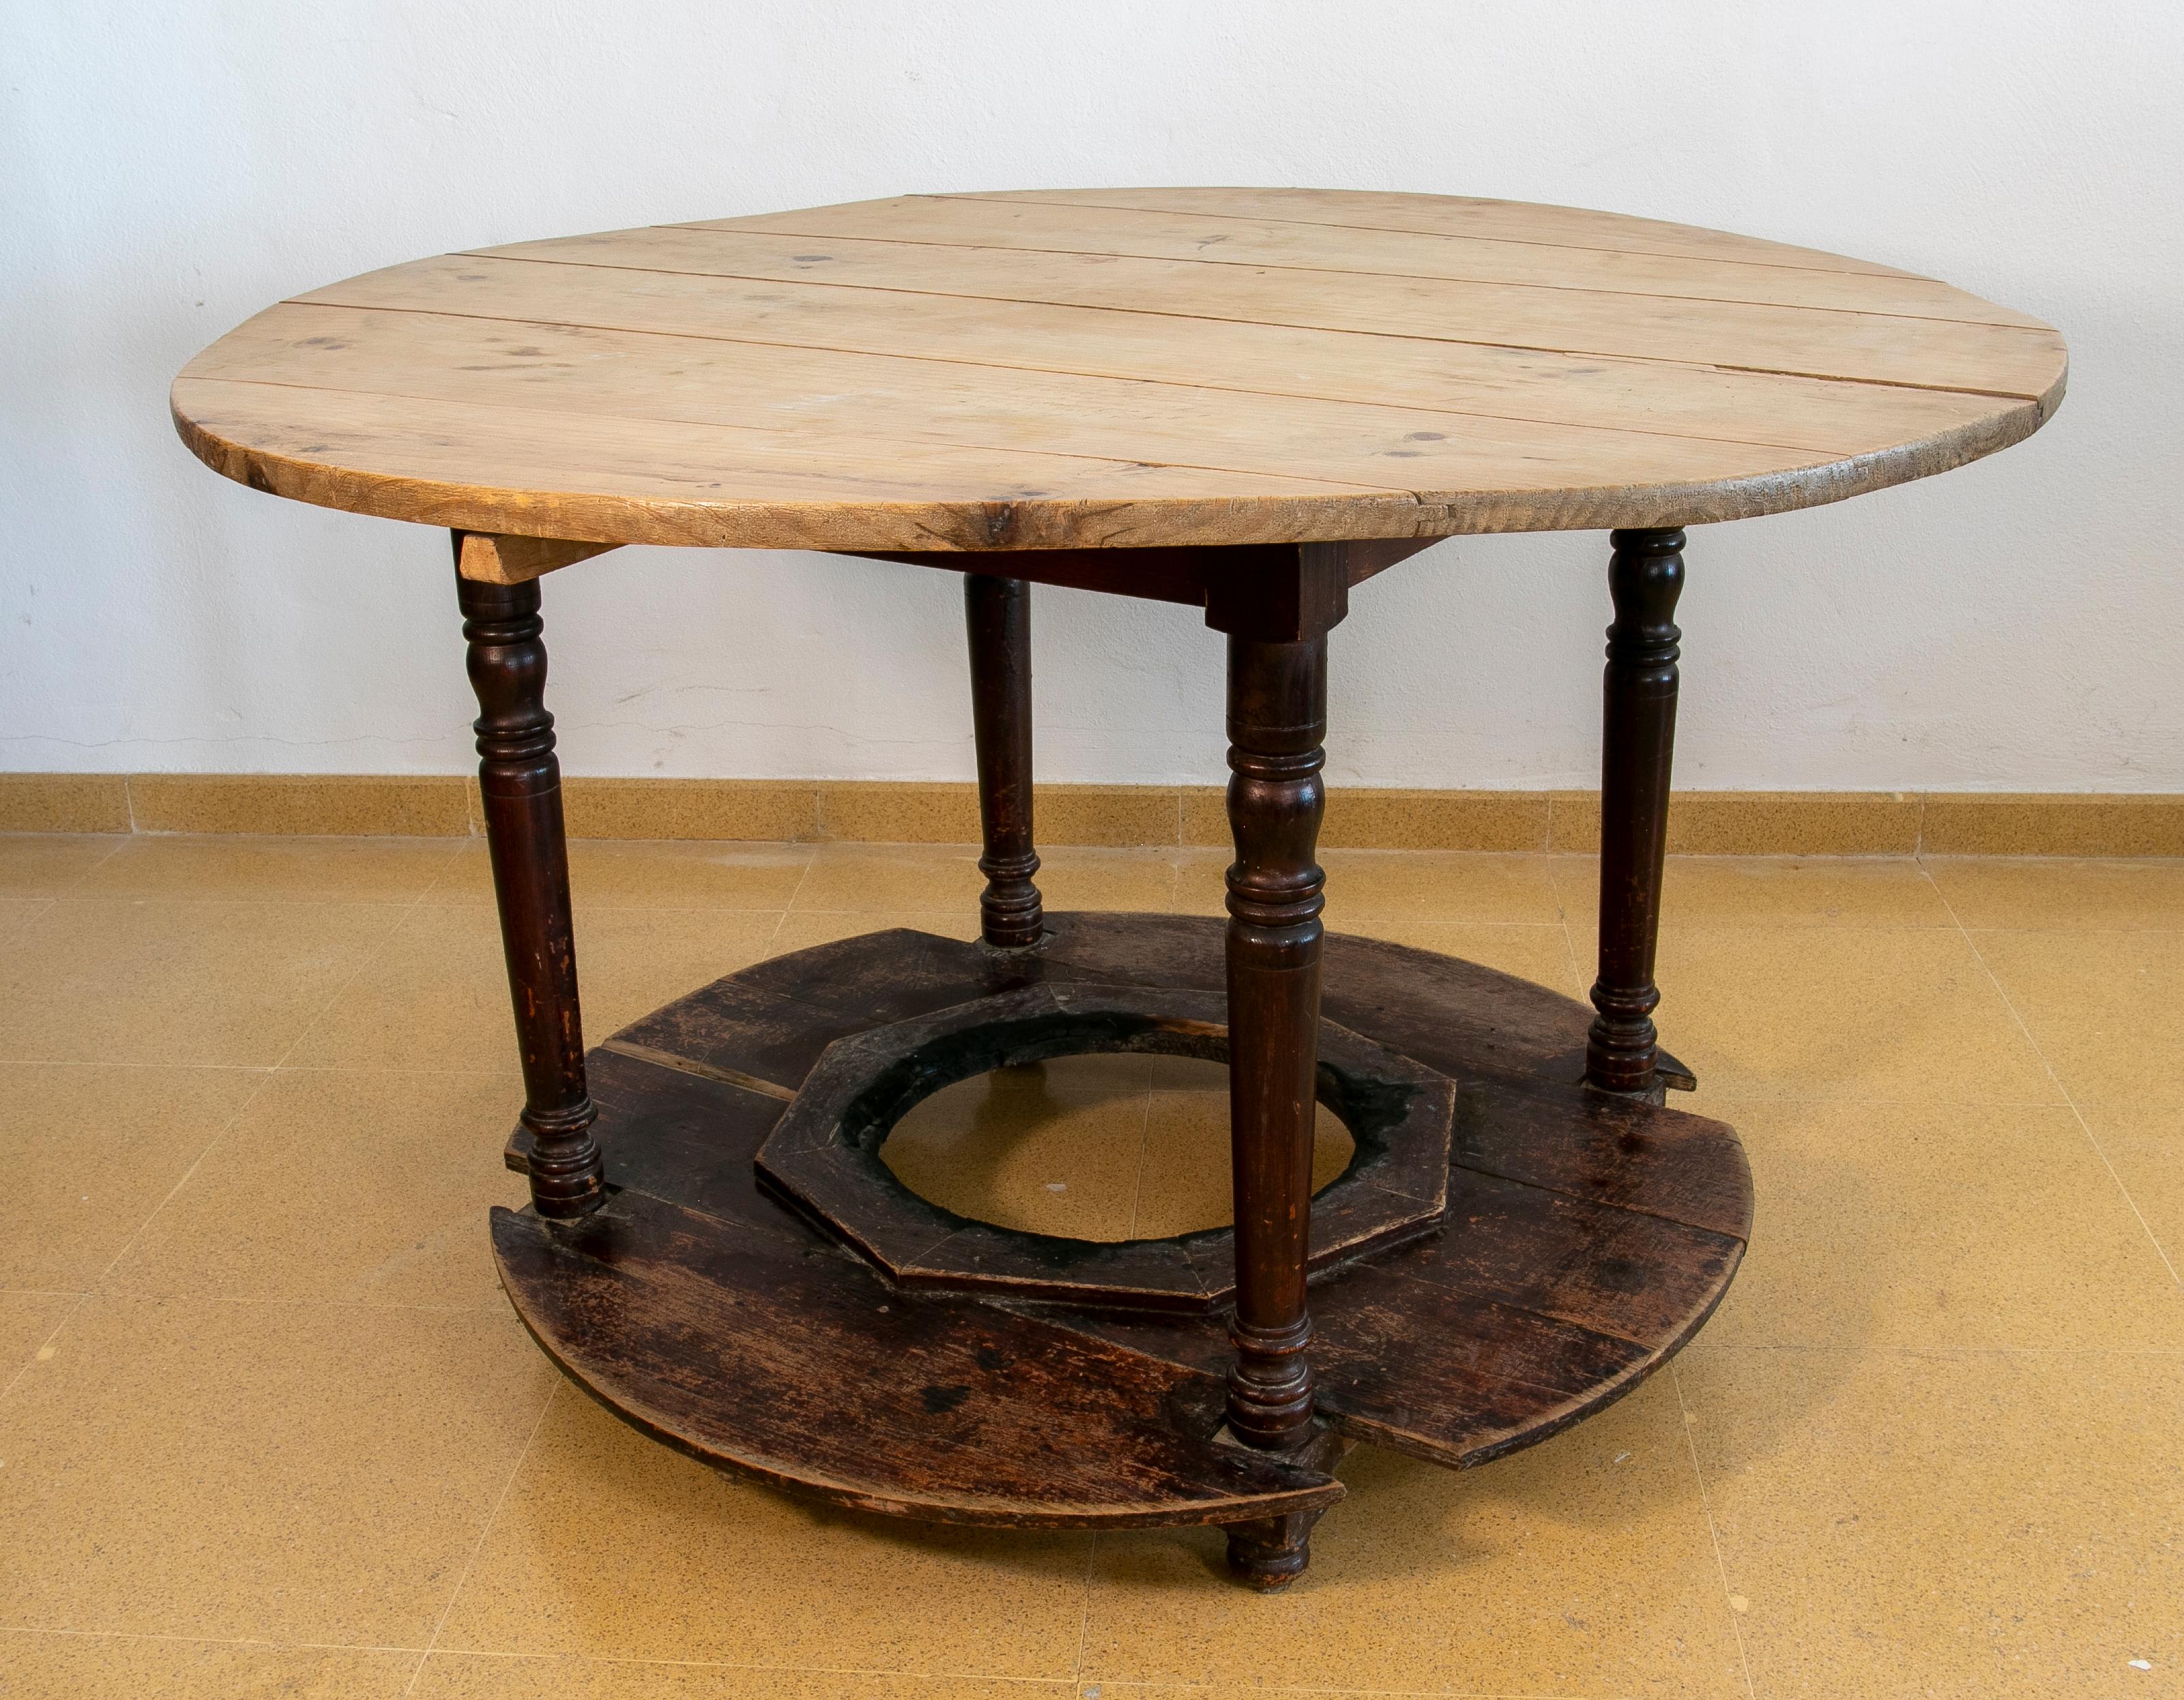 Spanish typical round wooden table to place brazier.